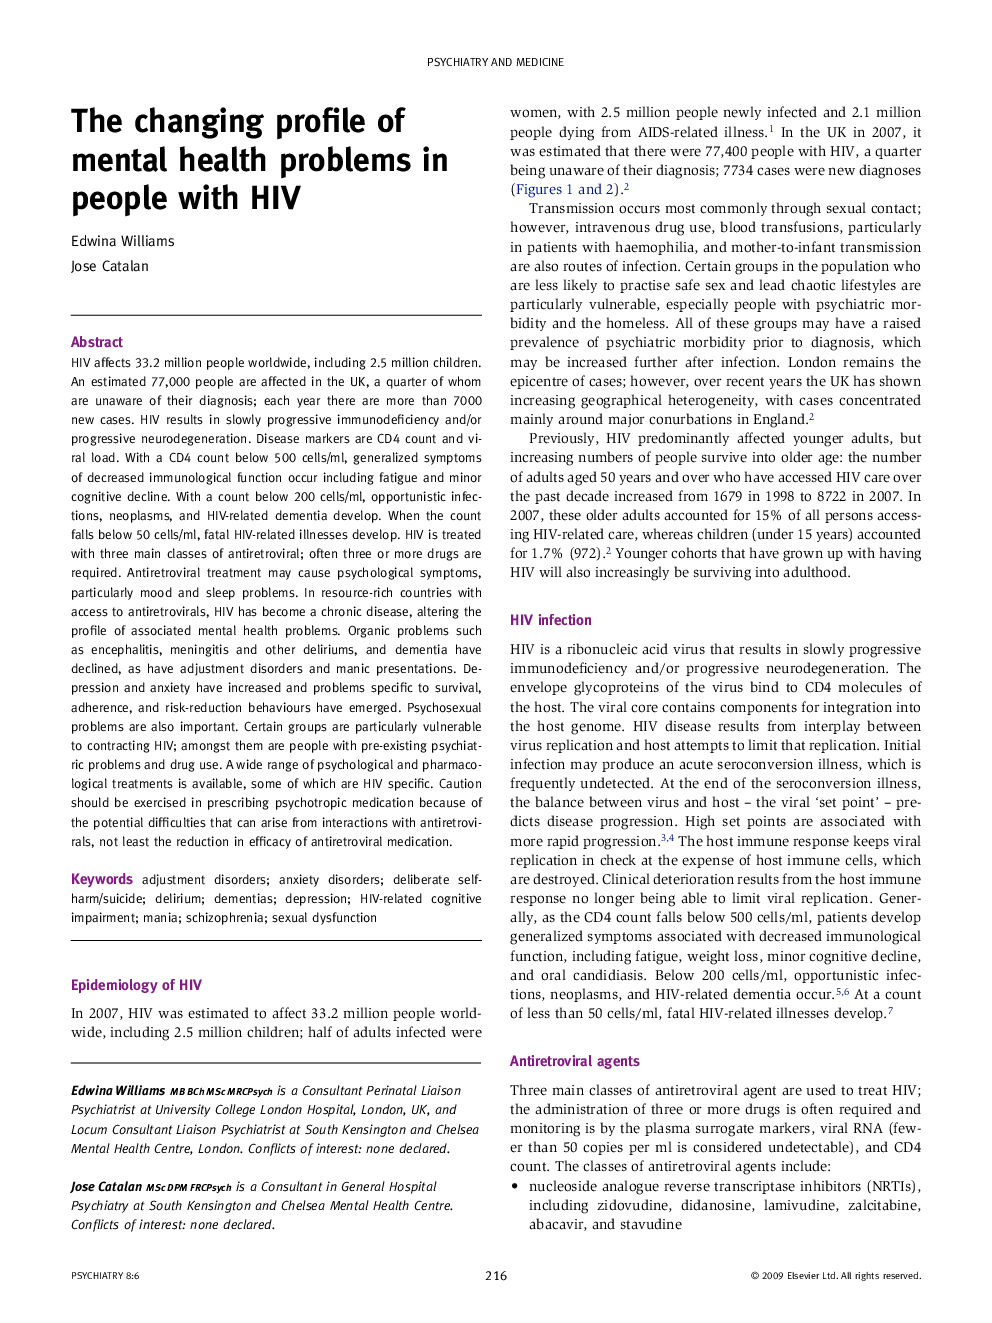 The changing profile of mental health problems in people with HIV